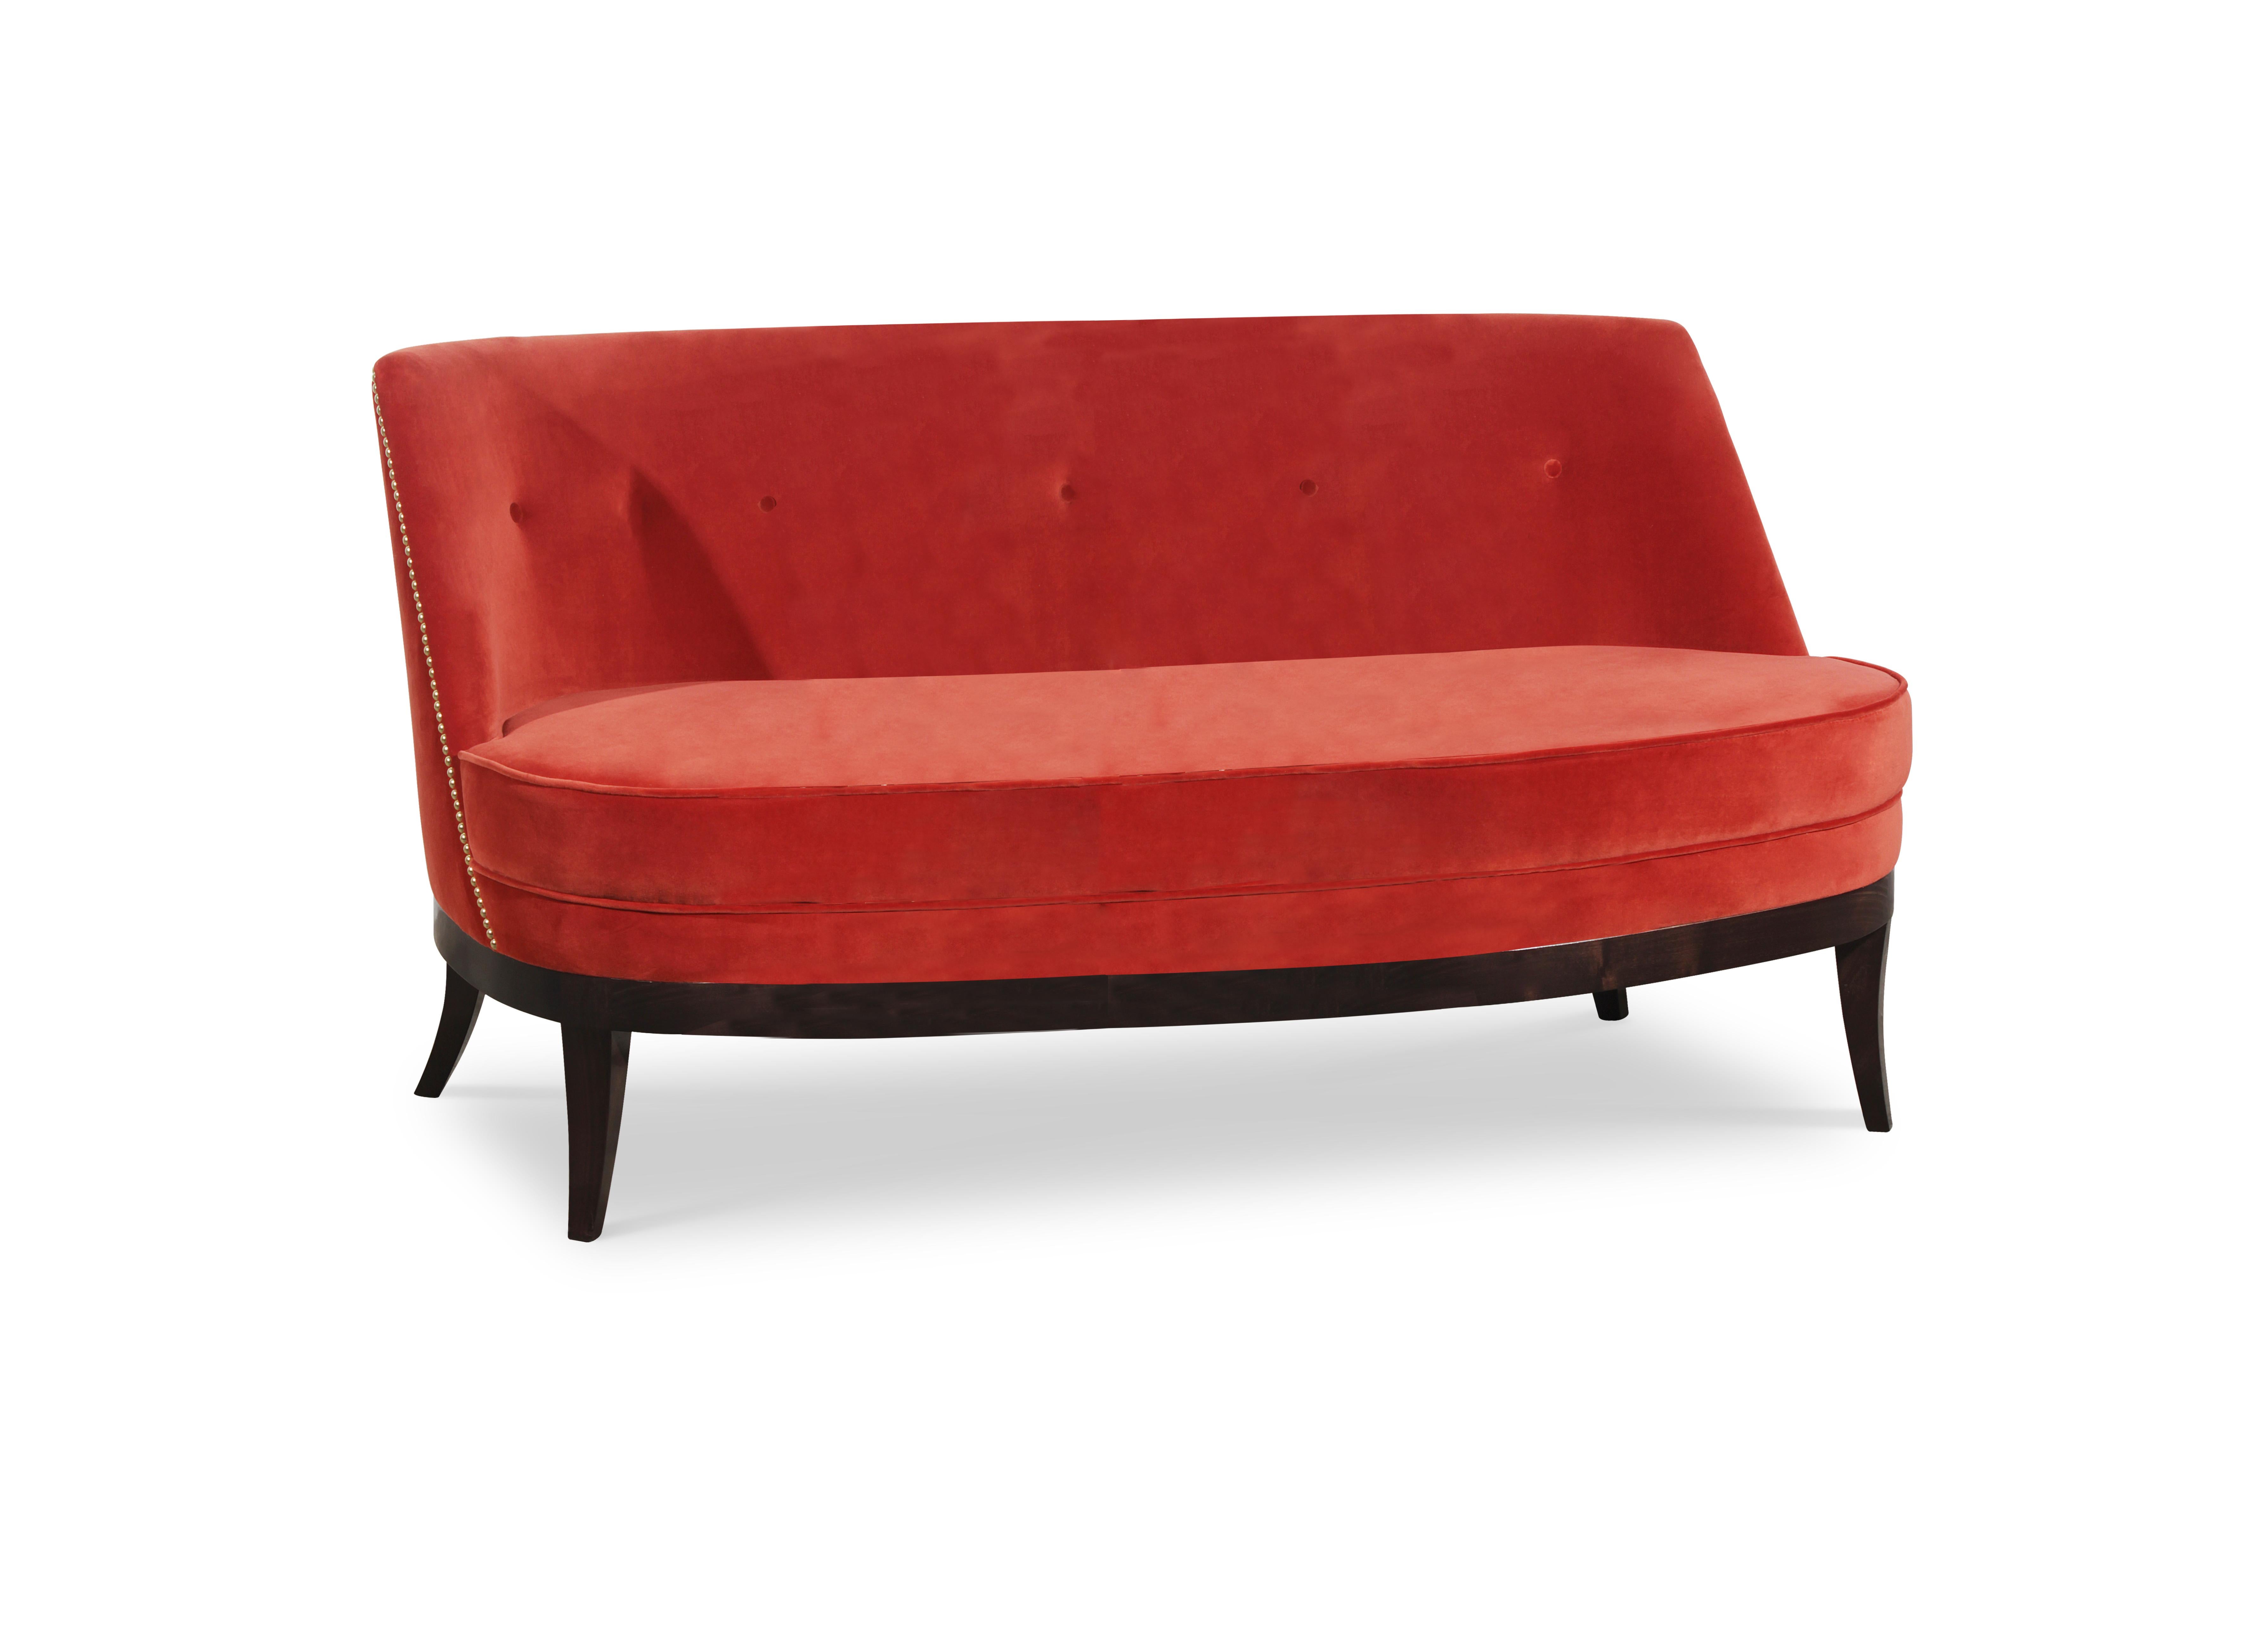 Debbie Reynolds was a 1950s legendary Hollywood star known for her glamour, versatility and humanitarian work. She was a woman of great strength and perseverance. Inspired that era’s retro design, the Debbie Mid-Century Modern sofa combines the best